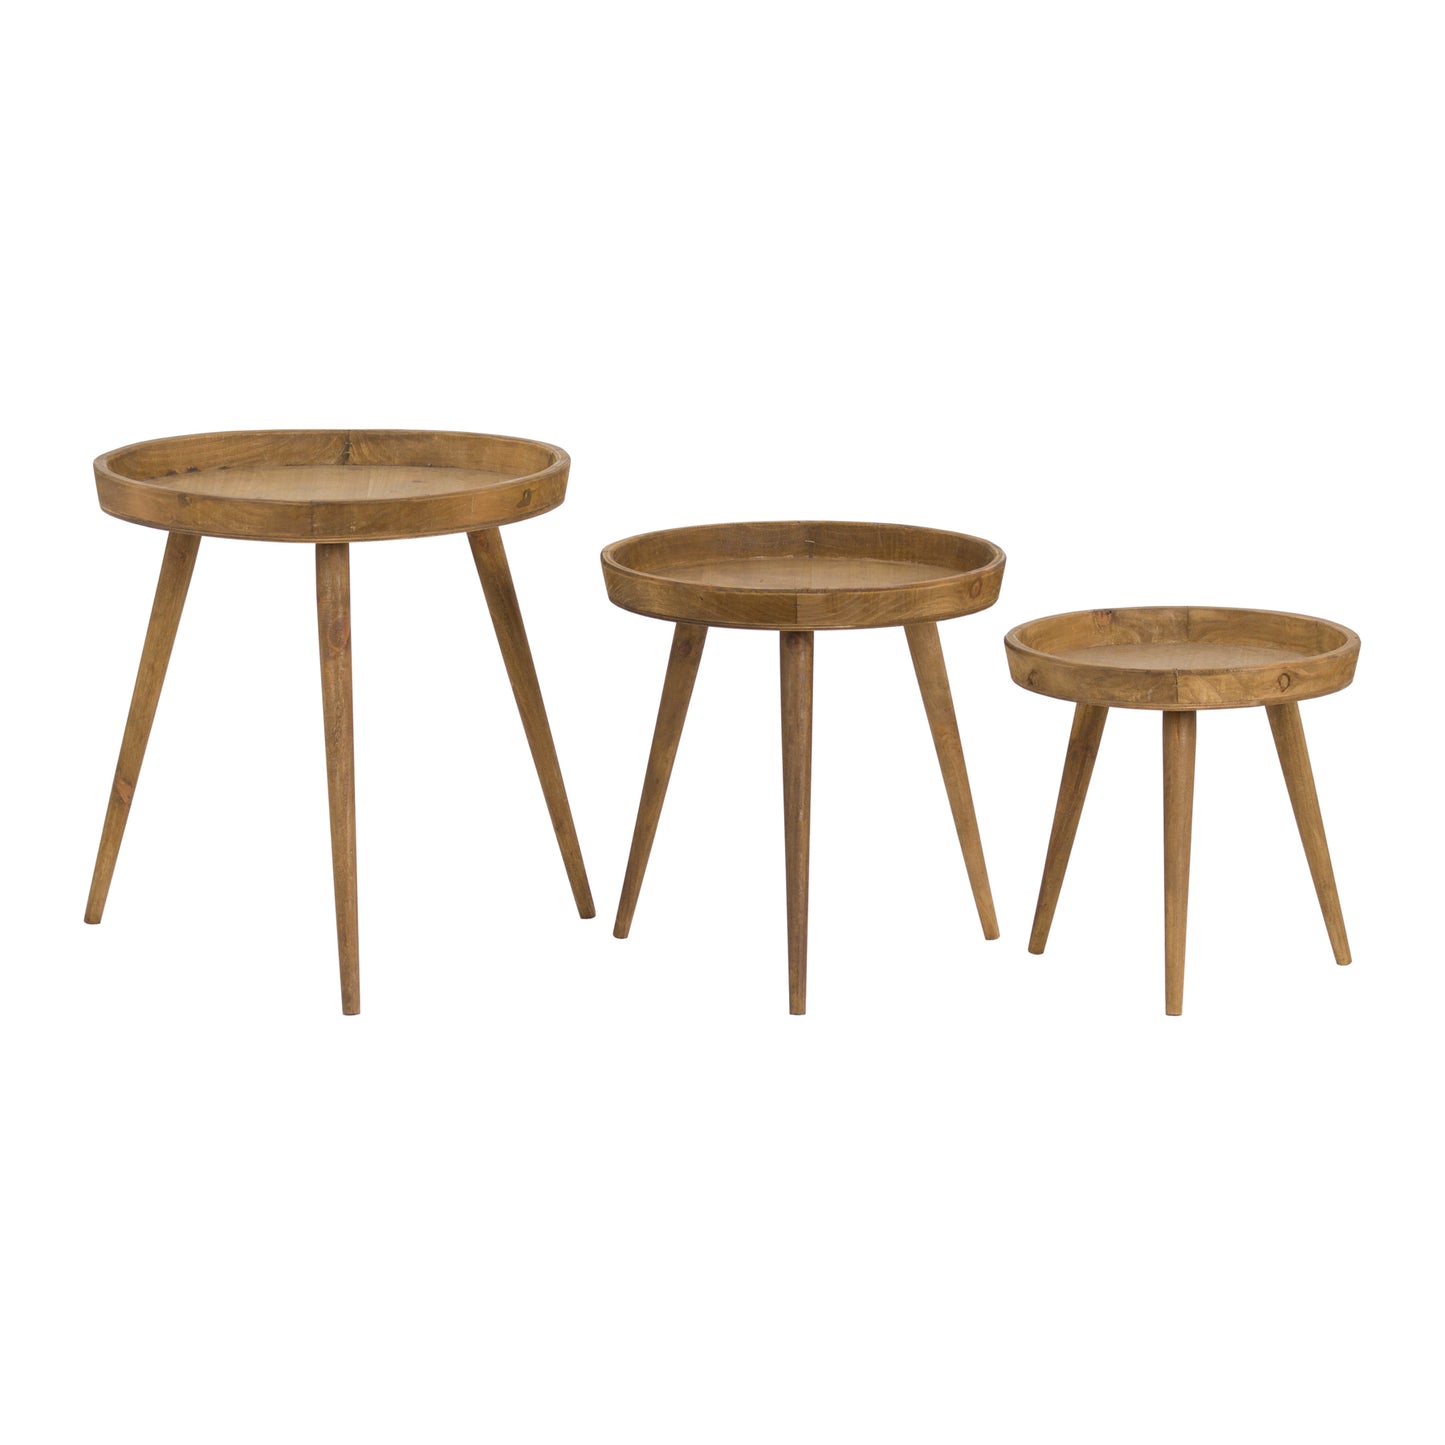 Loft Collection Set Of 3 Round Wooden Table